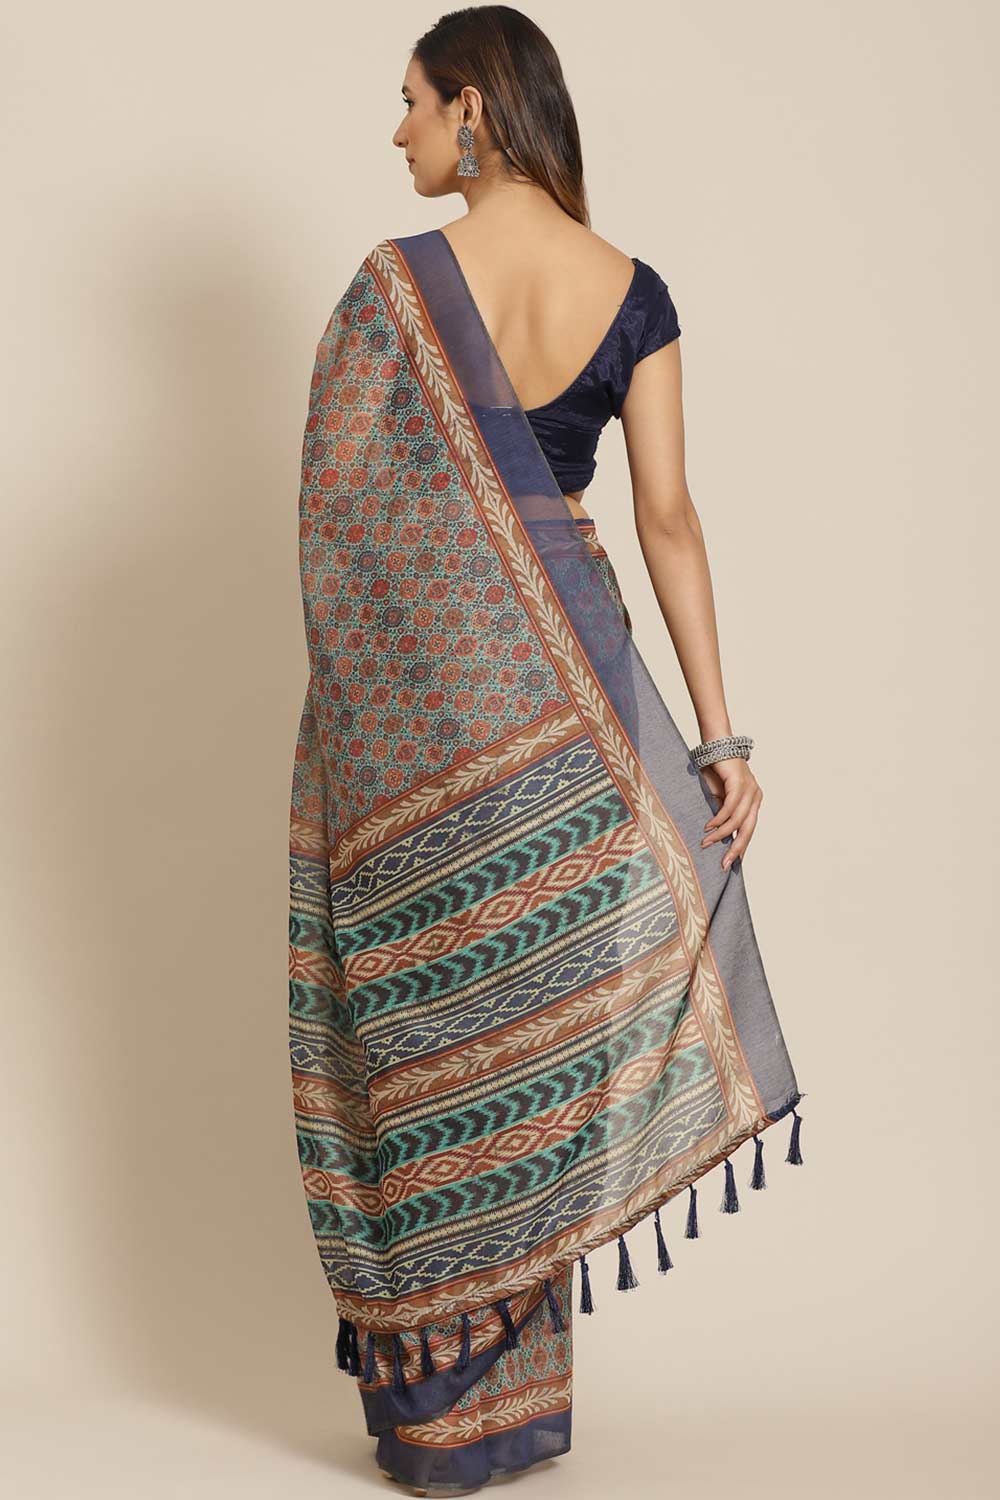 Shop Shubha Multicolor Cotton Block Printed One Minute Saree at best offer at our  Store - One Minute Saree